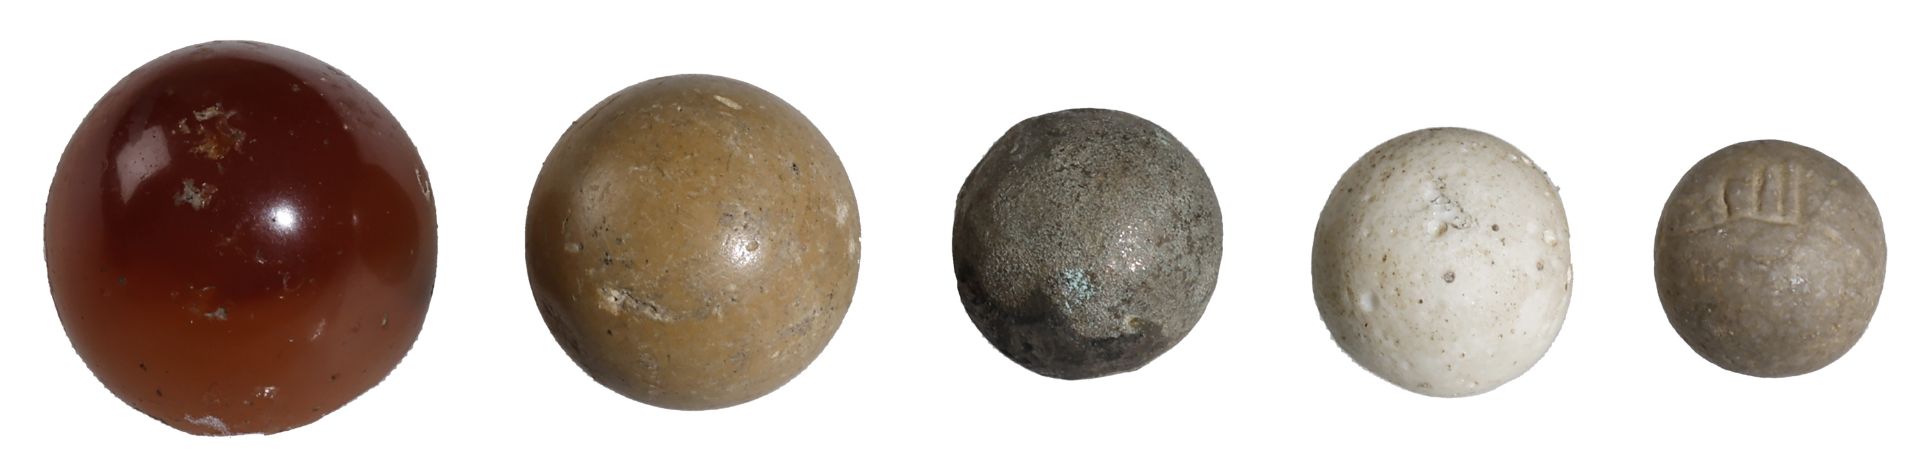 Judaea / Middle East, weights (5), 8th-1st century BC, all dome-shaped with a flat base [5]....